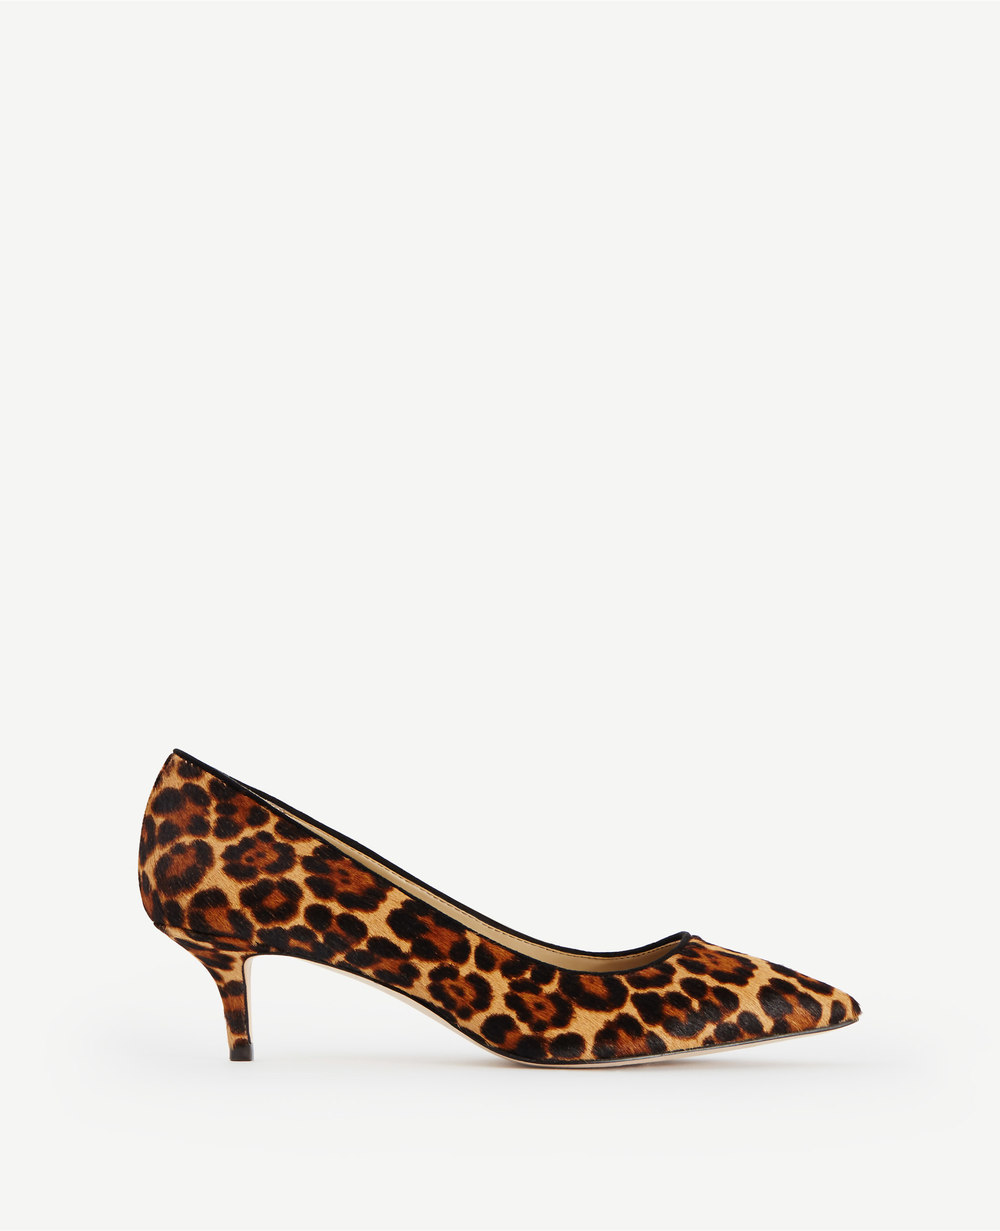 Reese Leopard Print Haircalf (AKA, "pony") Pumps. Ann Taylor. $148. Additional 40% off with code: FRIENDS40.